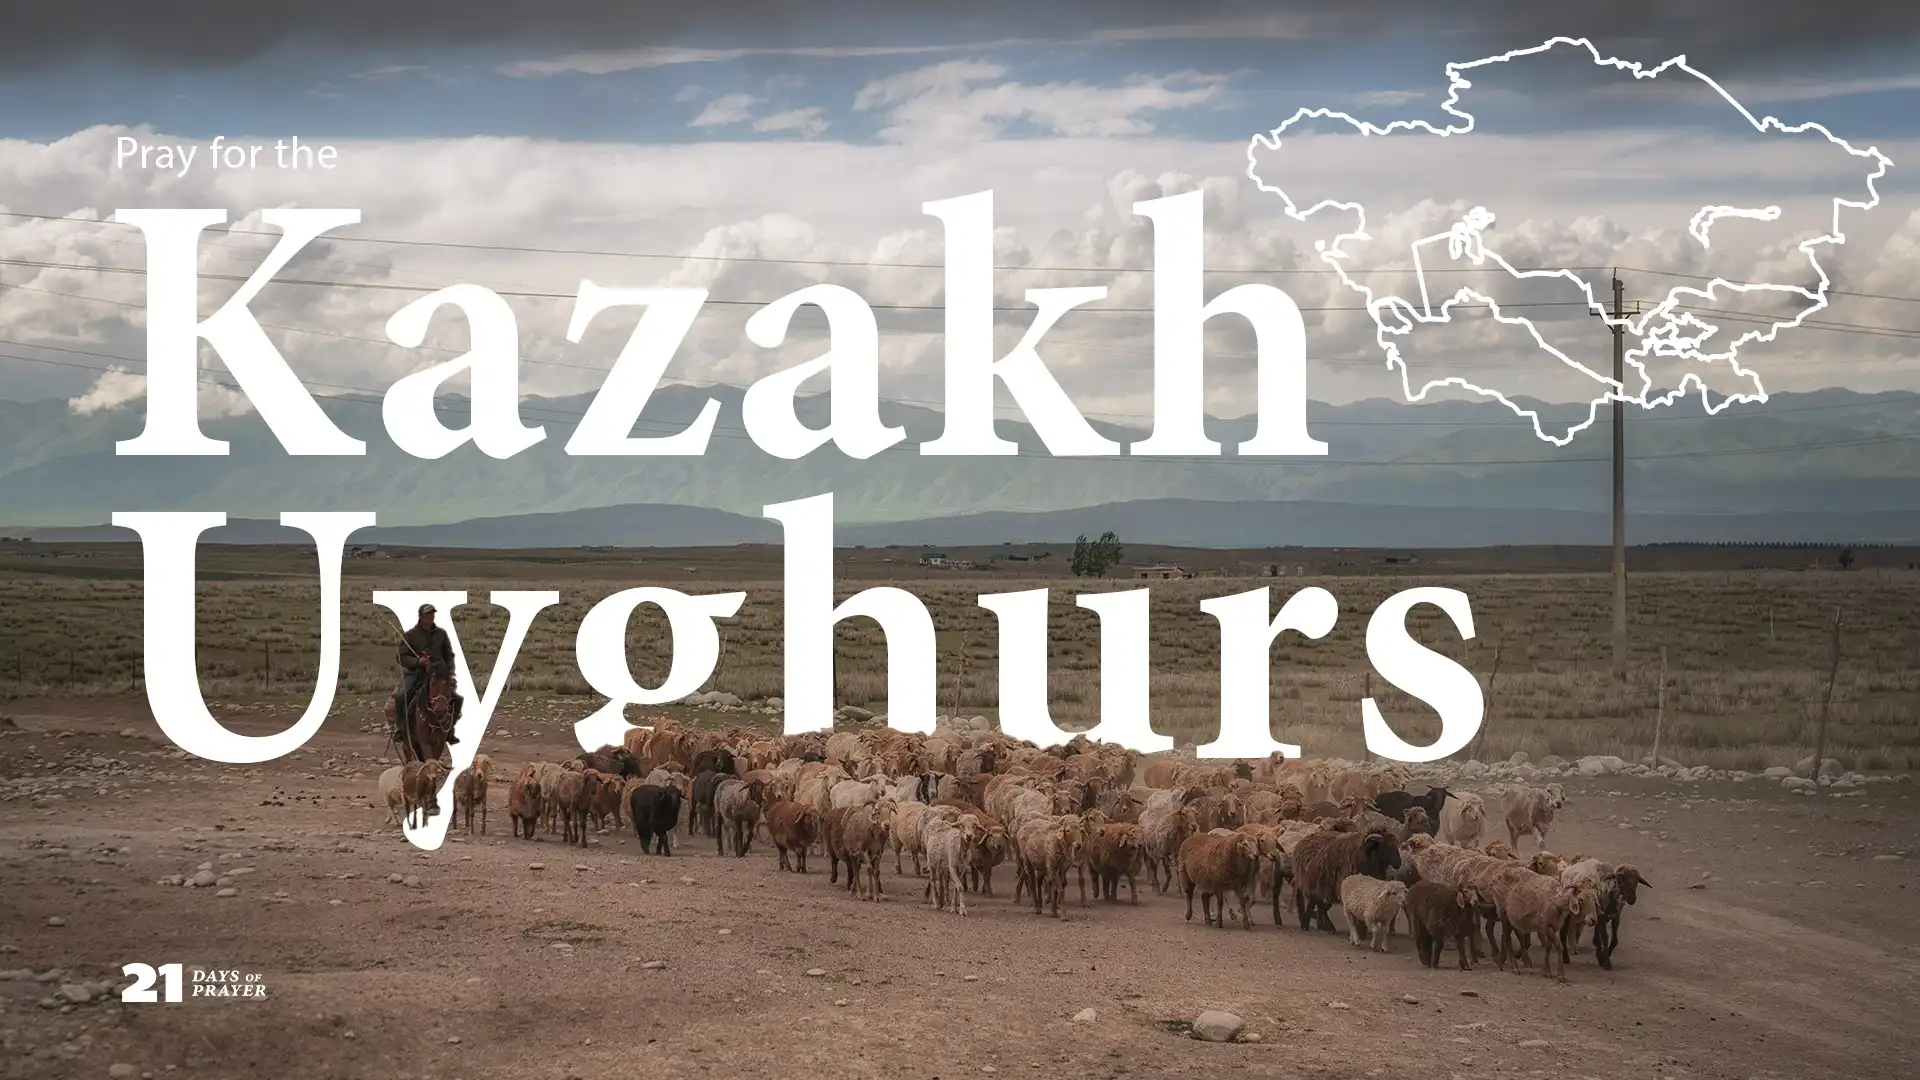 Featured Image for “21 Days of Prayer | Day 20: Kazakh Uyghur”